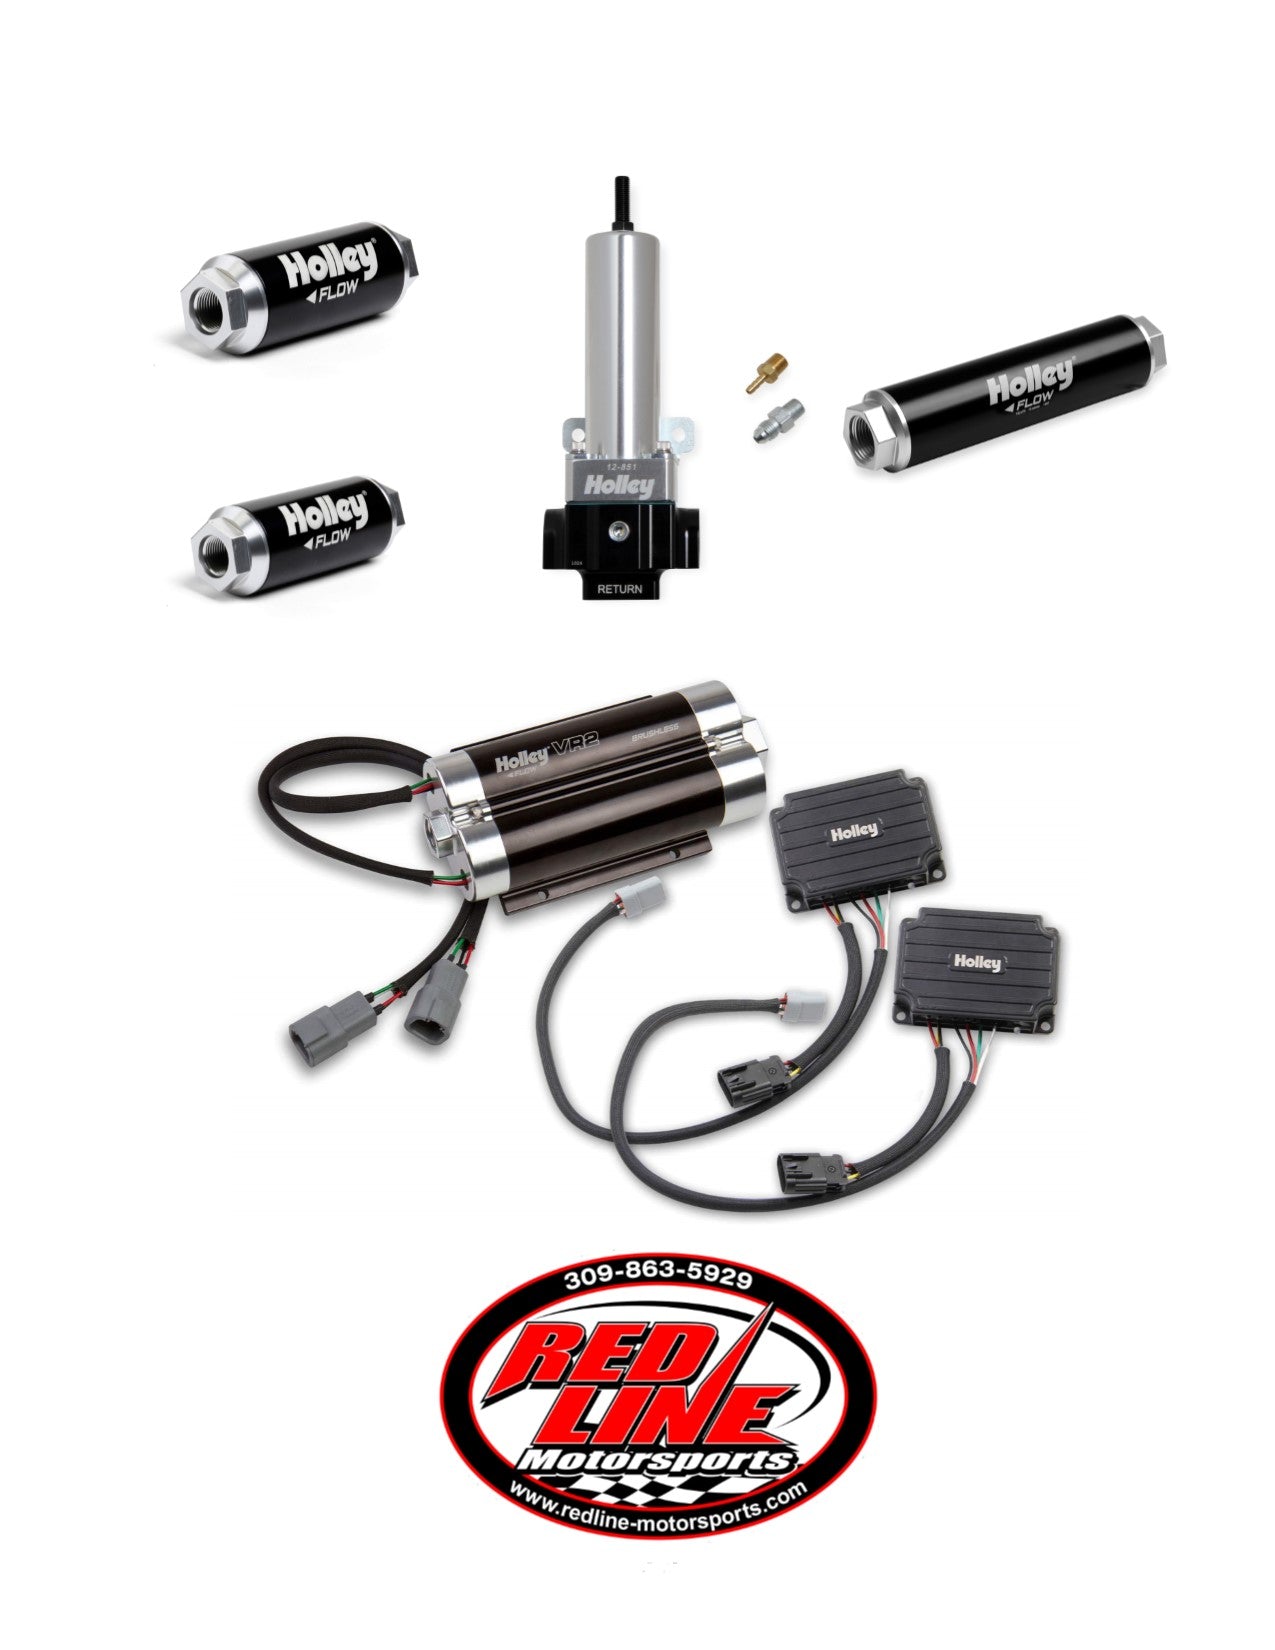 VR2 BRUSHLESS FUEL PUMP-DUAL 10AN INLET WITH 2 PORT REGULATOR KIT (Up to 3200 HP N/A or 1900 HP Boosted on Gasoline at 13.8V)